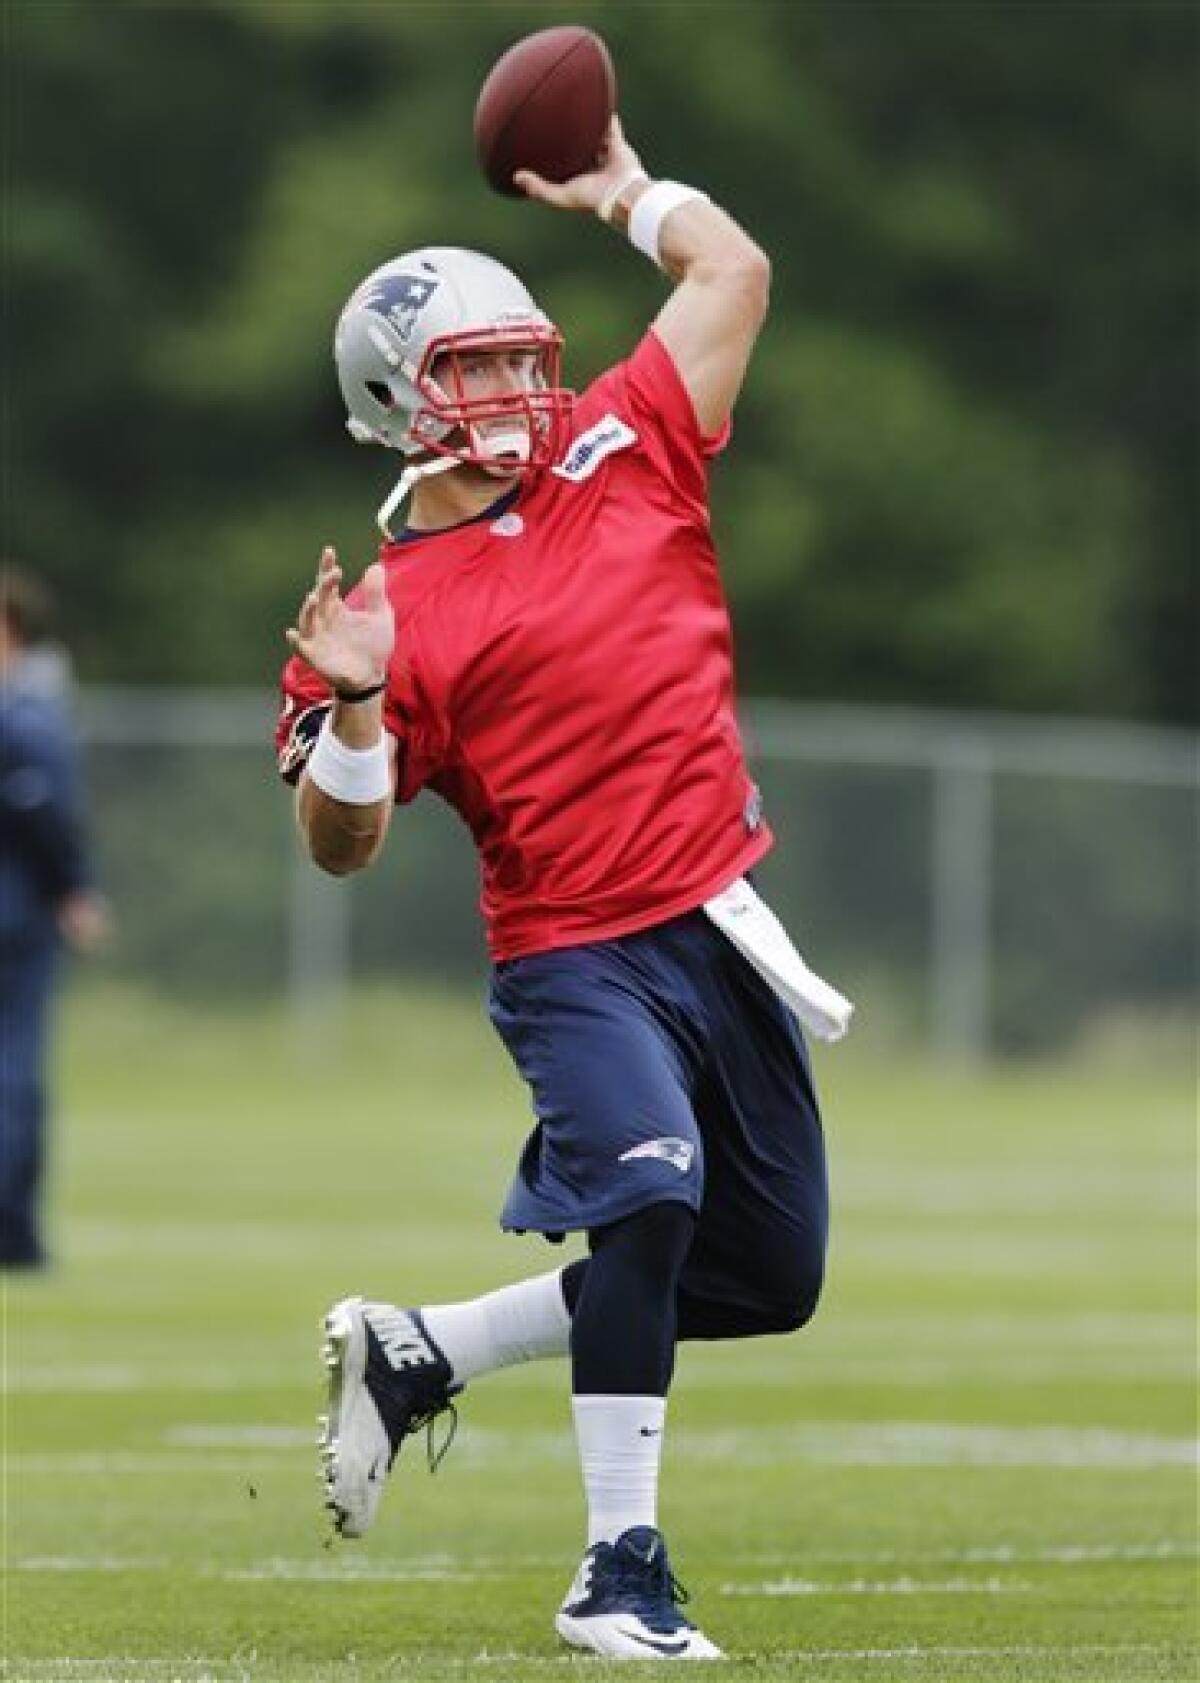 Tebow time up for Patriots